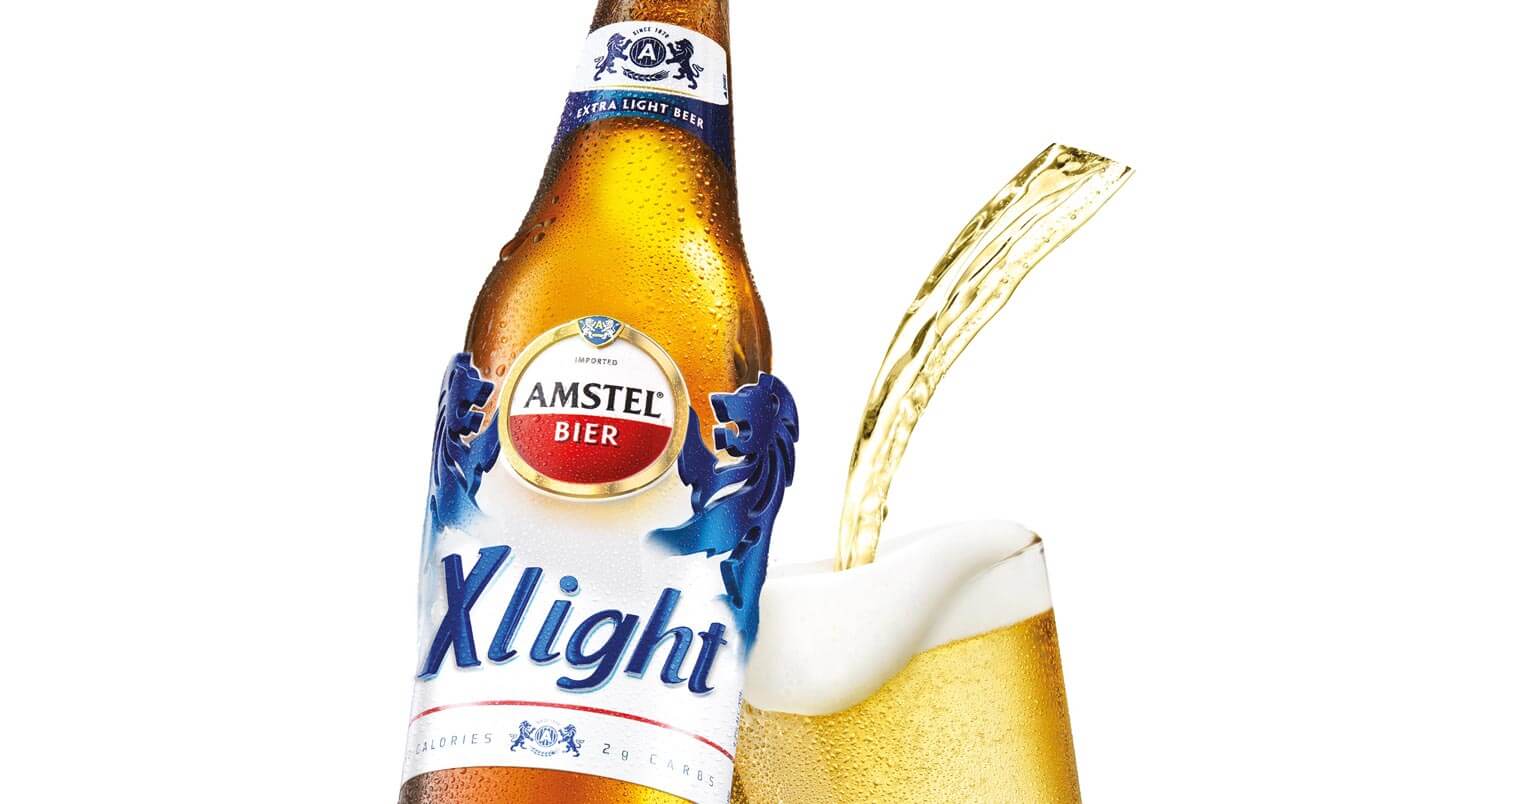 Amstel Xlight, bottle and glass on white, featured image